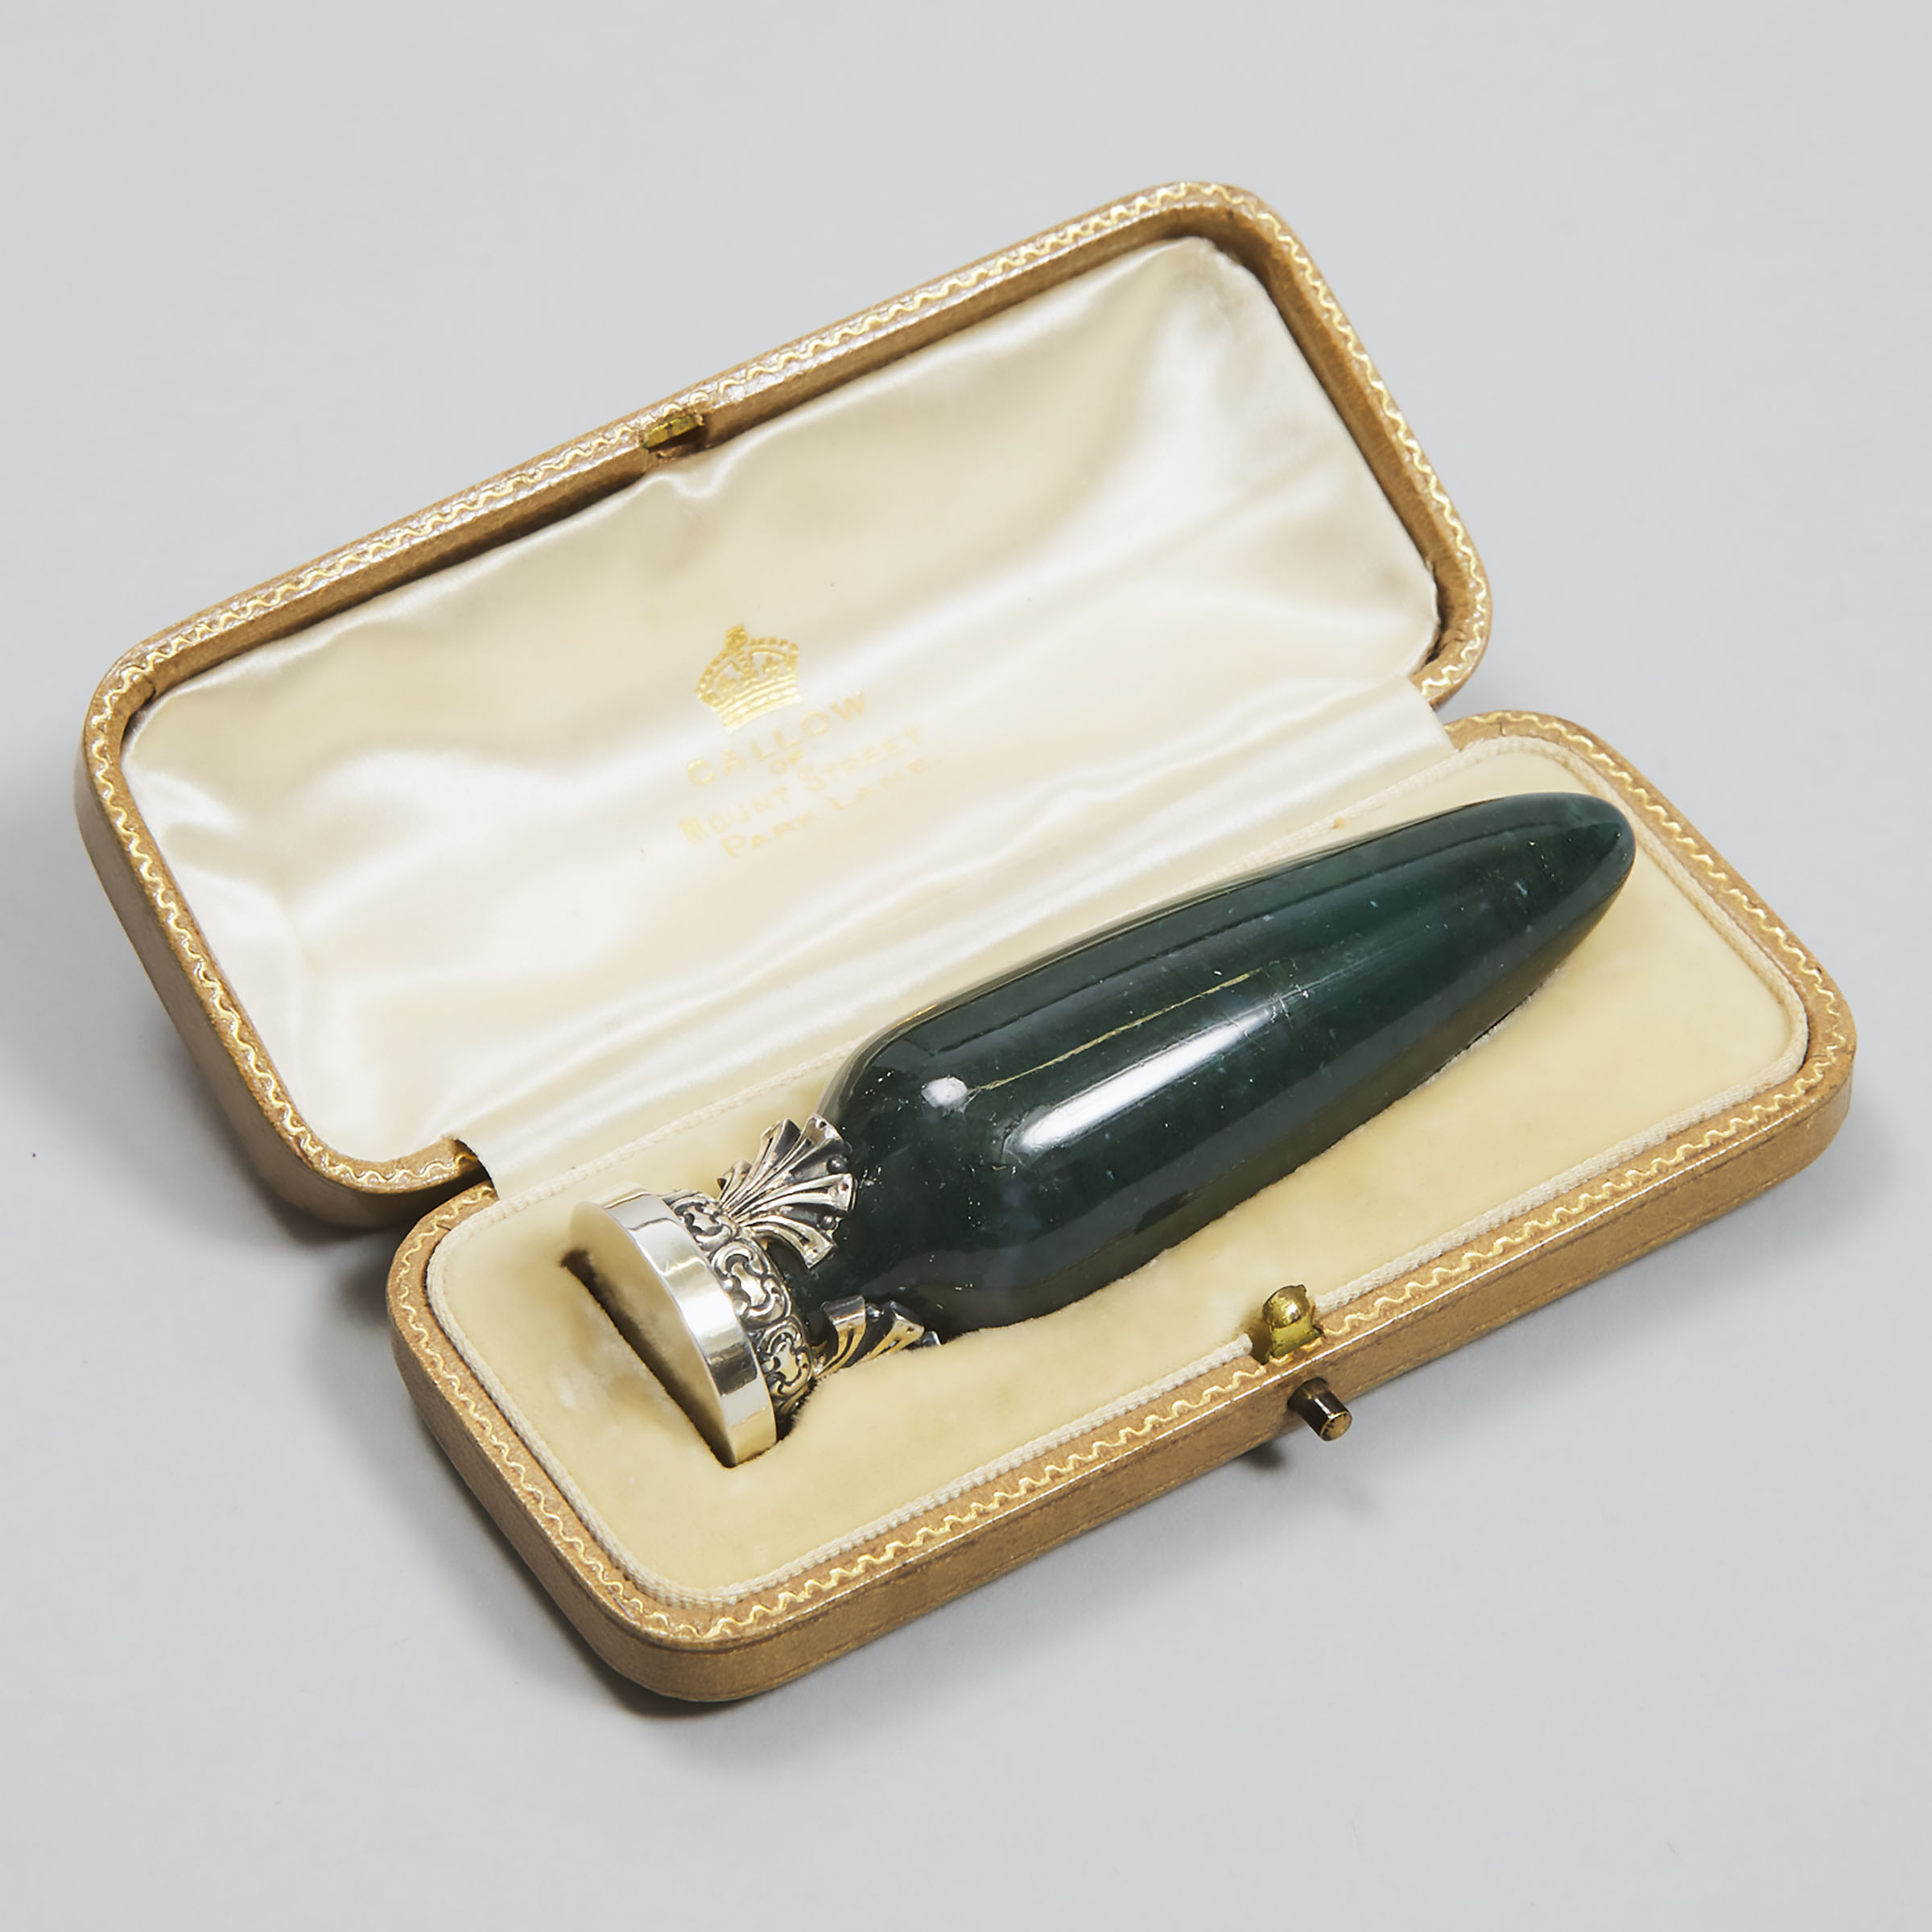 English Silver Mounted Spinach Jade Desk Seal, Callow of Mount Street, Park Lane, London, early 20th century